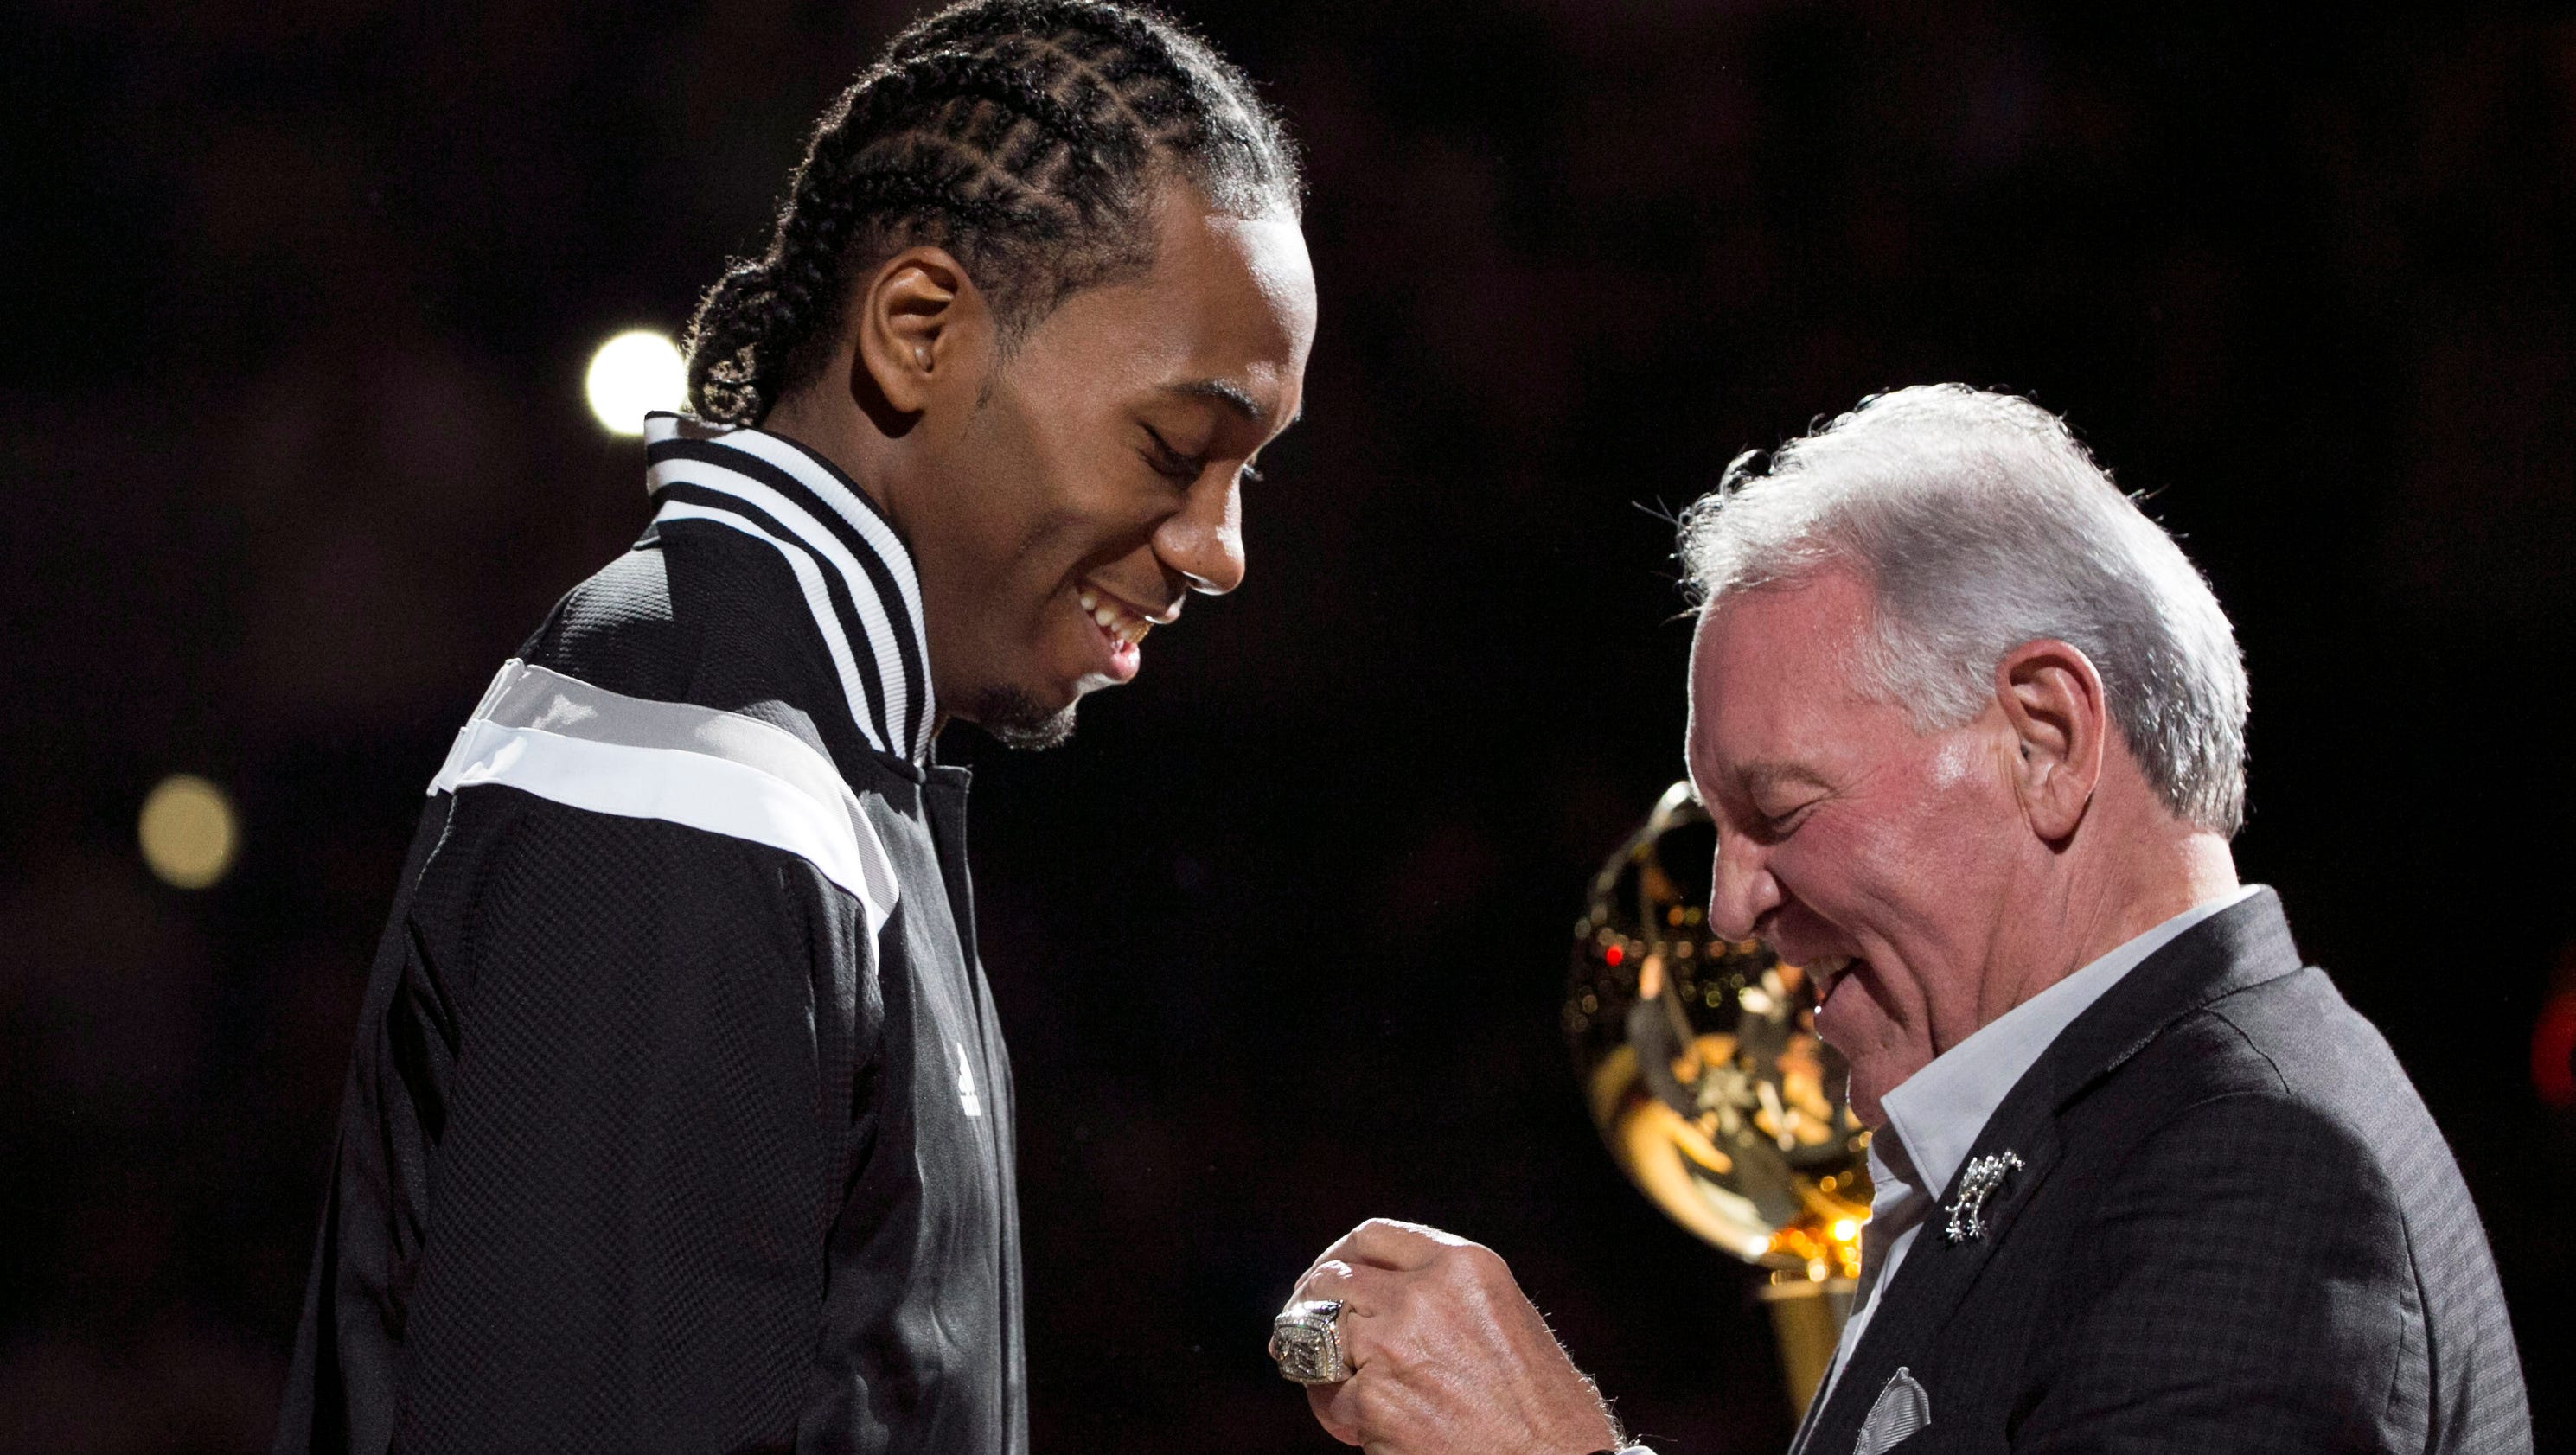 Are Spurs about to make mistake with Kawhi Leonard?